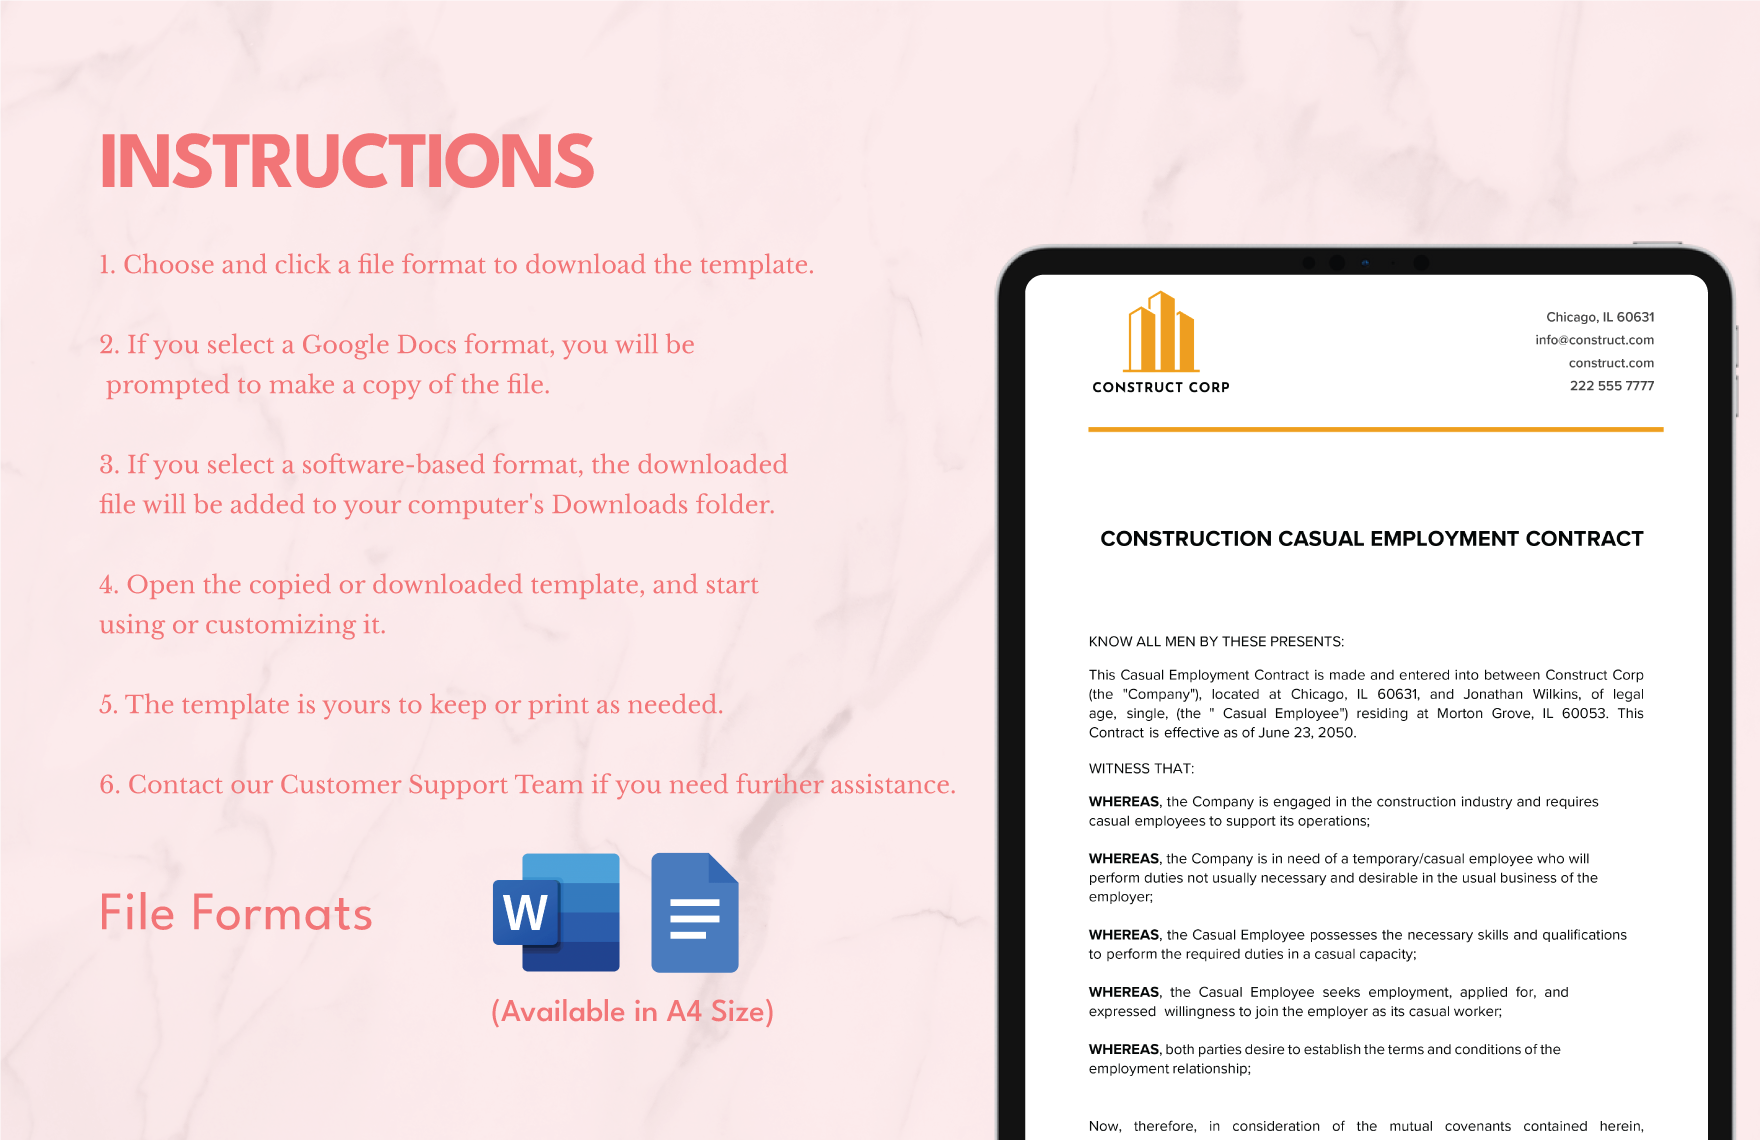 Construction Casual Employment Contract Template